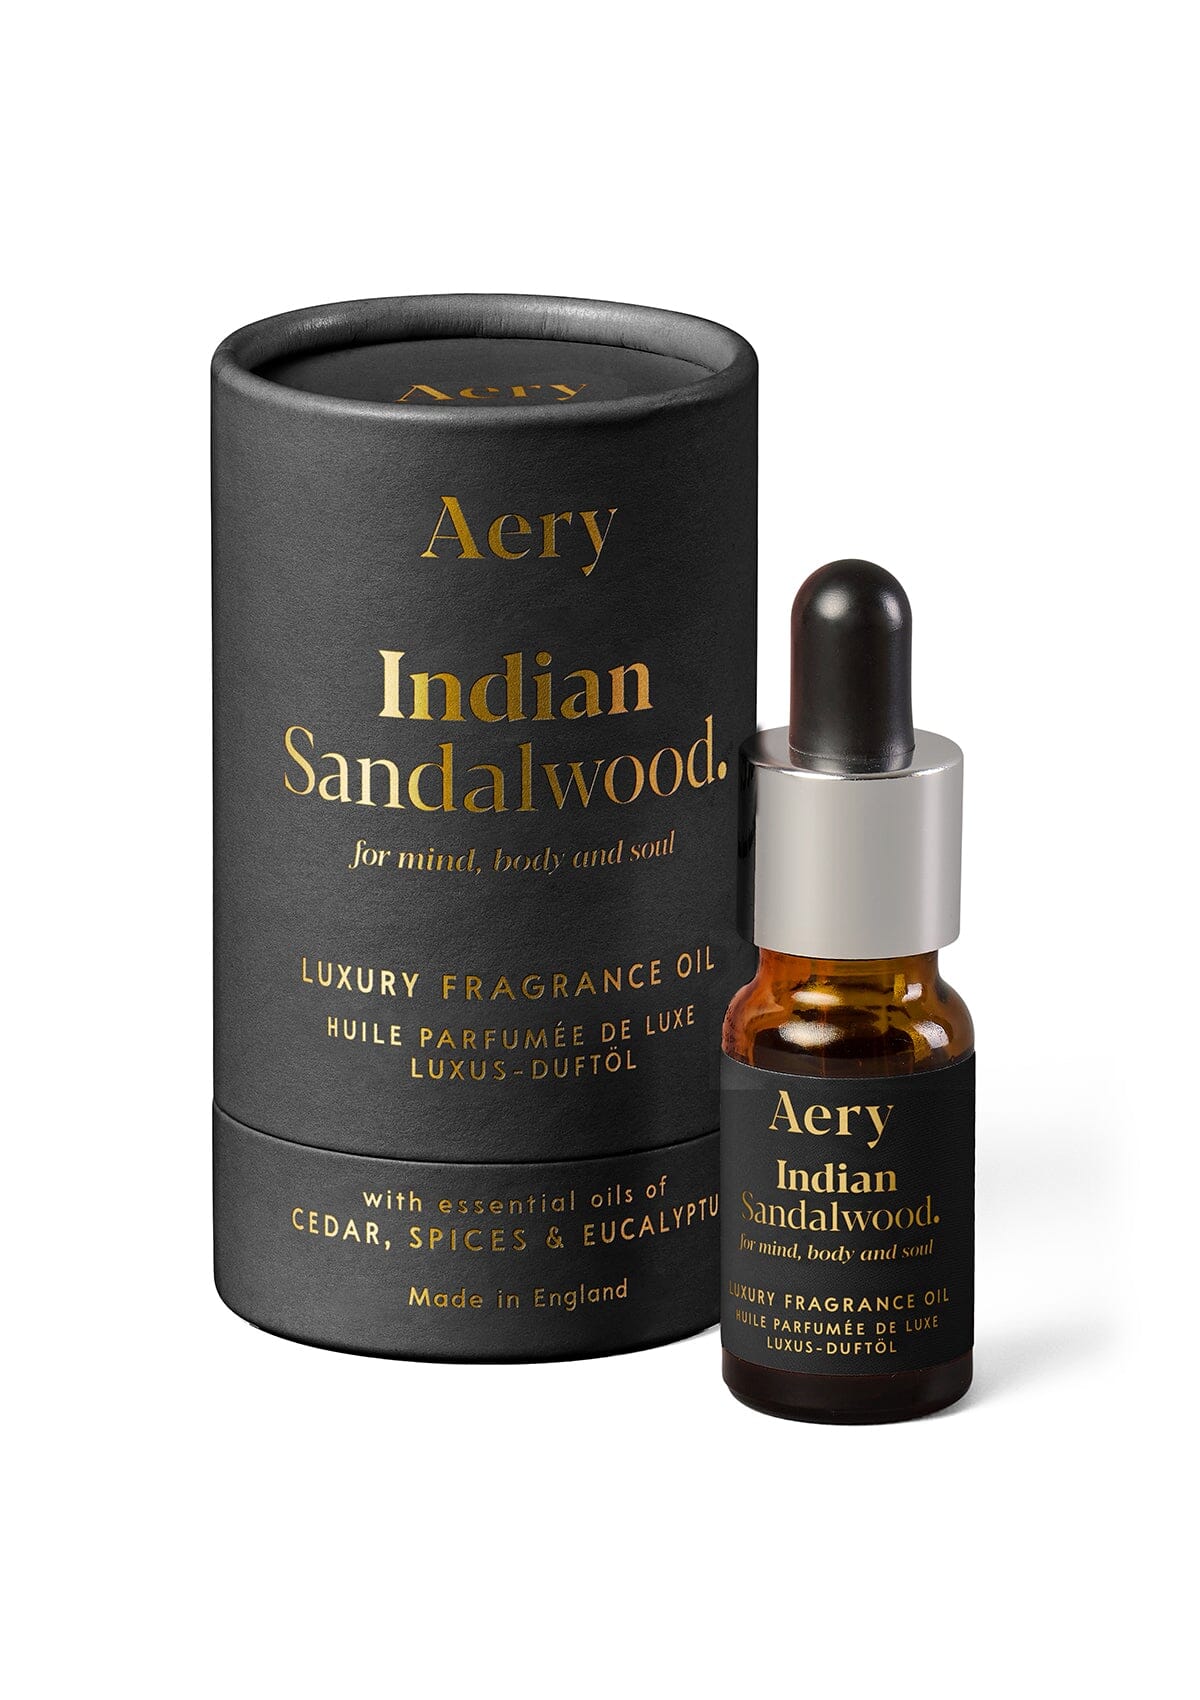 Black Indian Sandalwood fragrance oil displayed next to product packaging by Aery on white background 